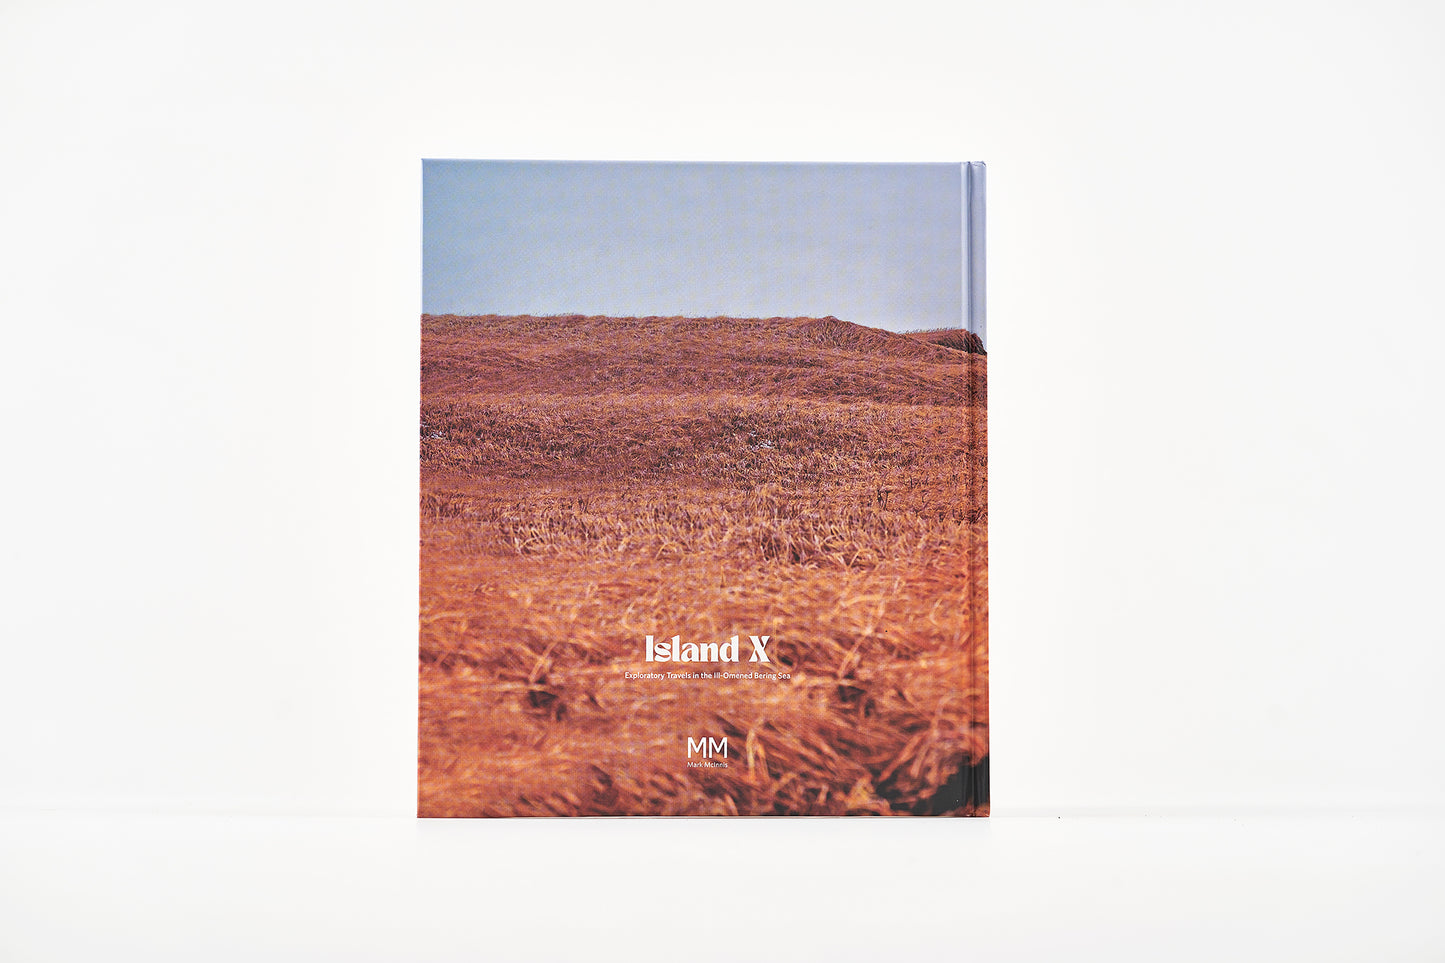 Island X- A photography book by Mark McInnis- Standard edition back.